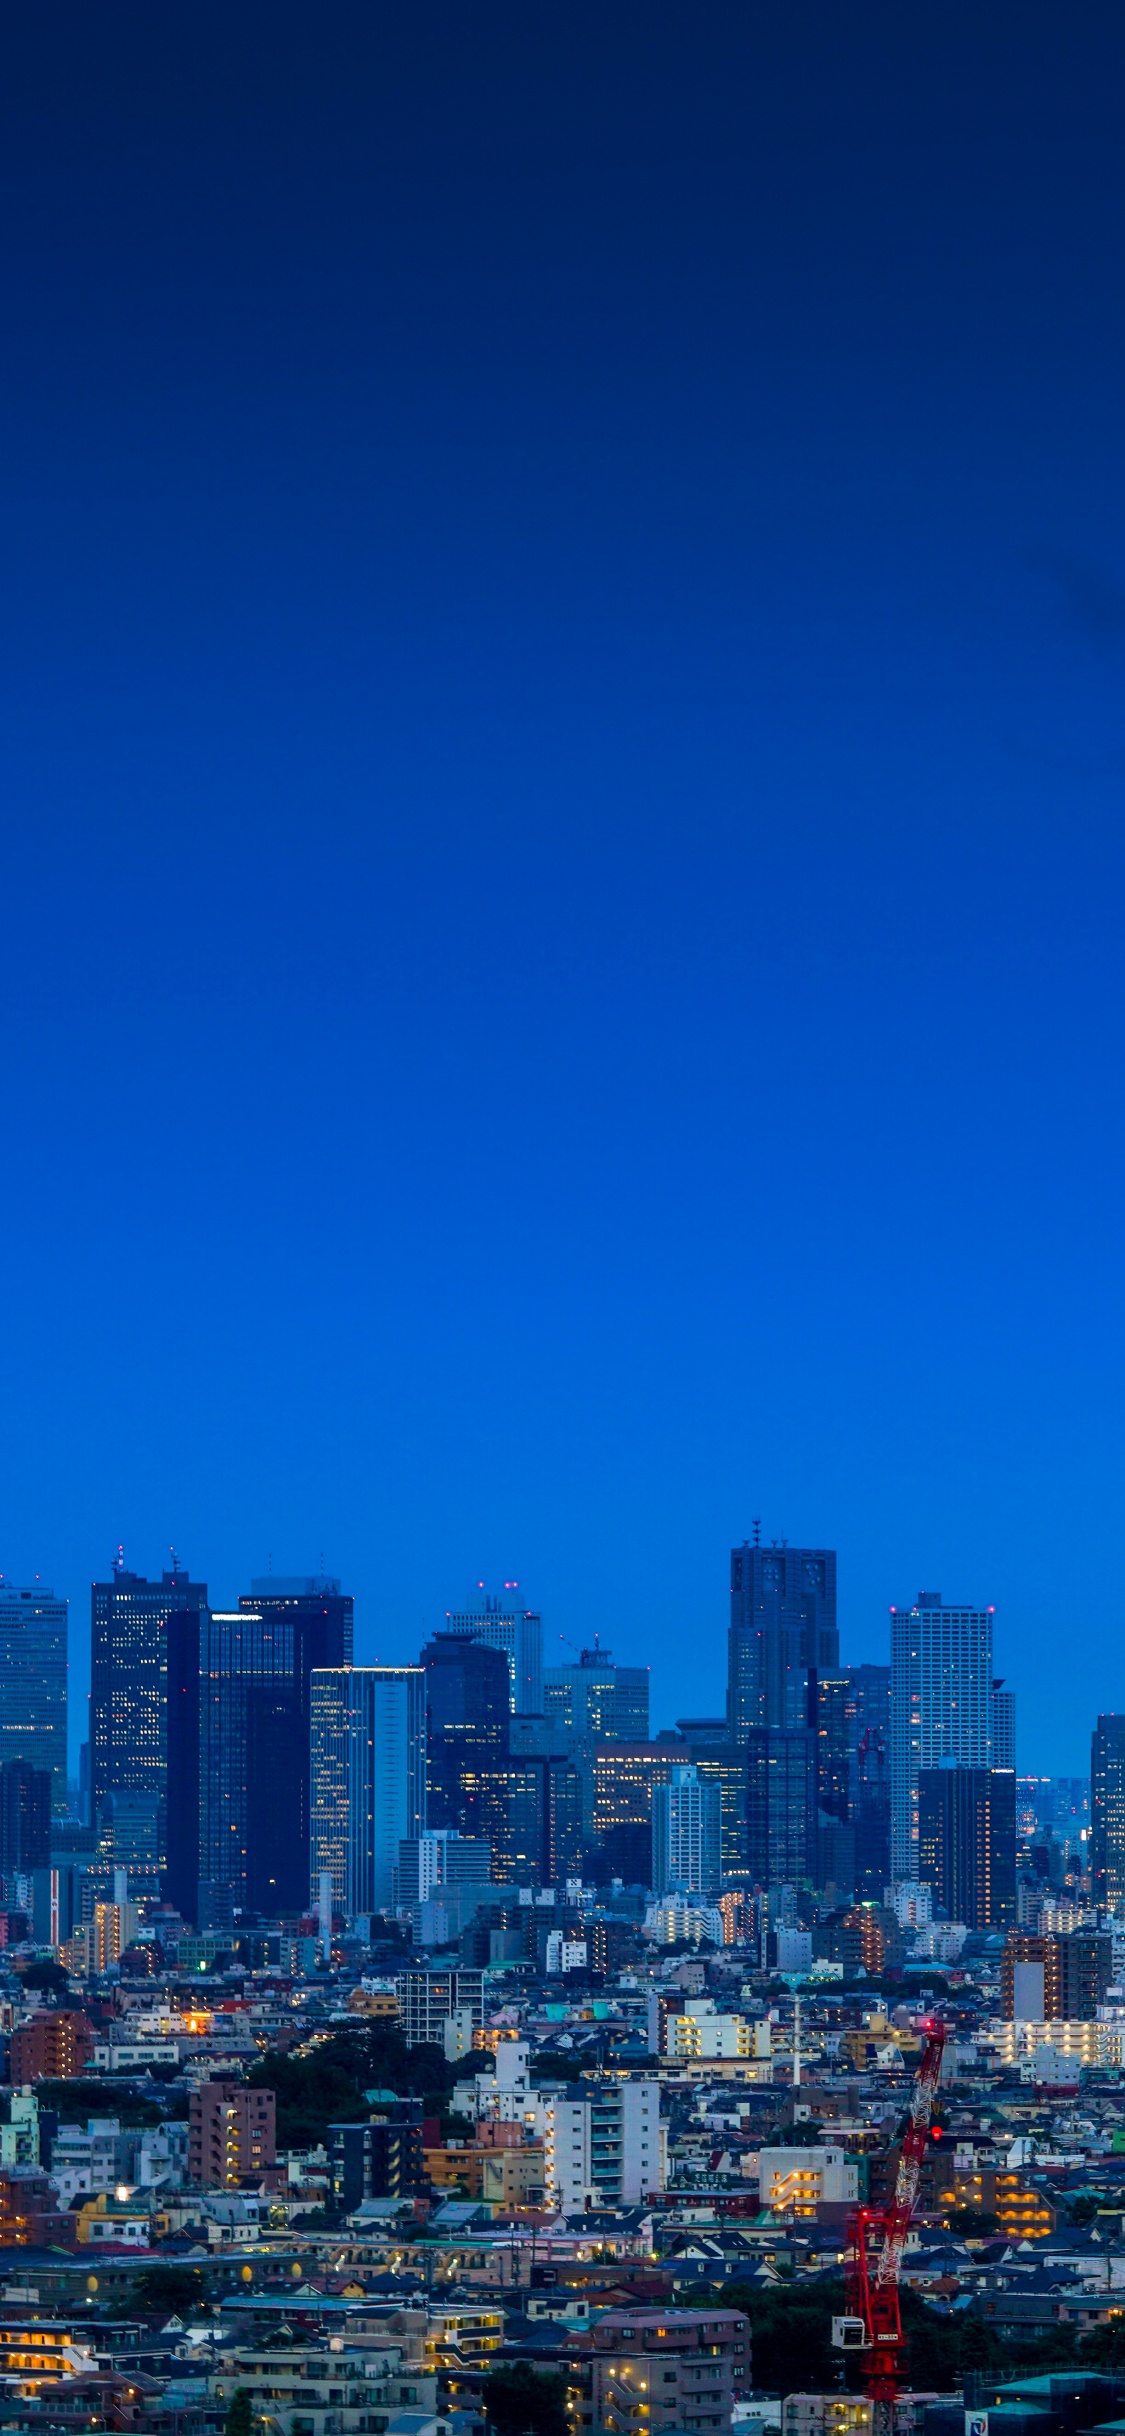 City With High Rise Buildings Under Blue Sky During Daytime. Wallpaper in 1125x2436 Resolution